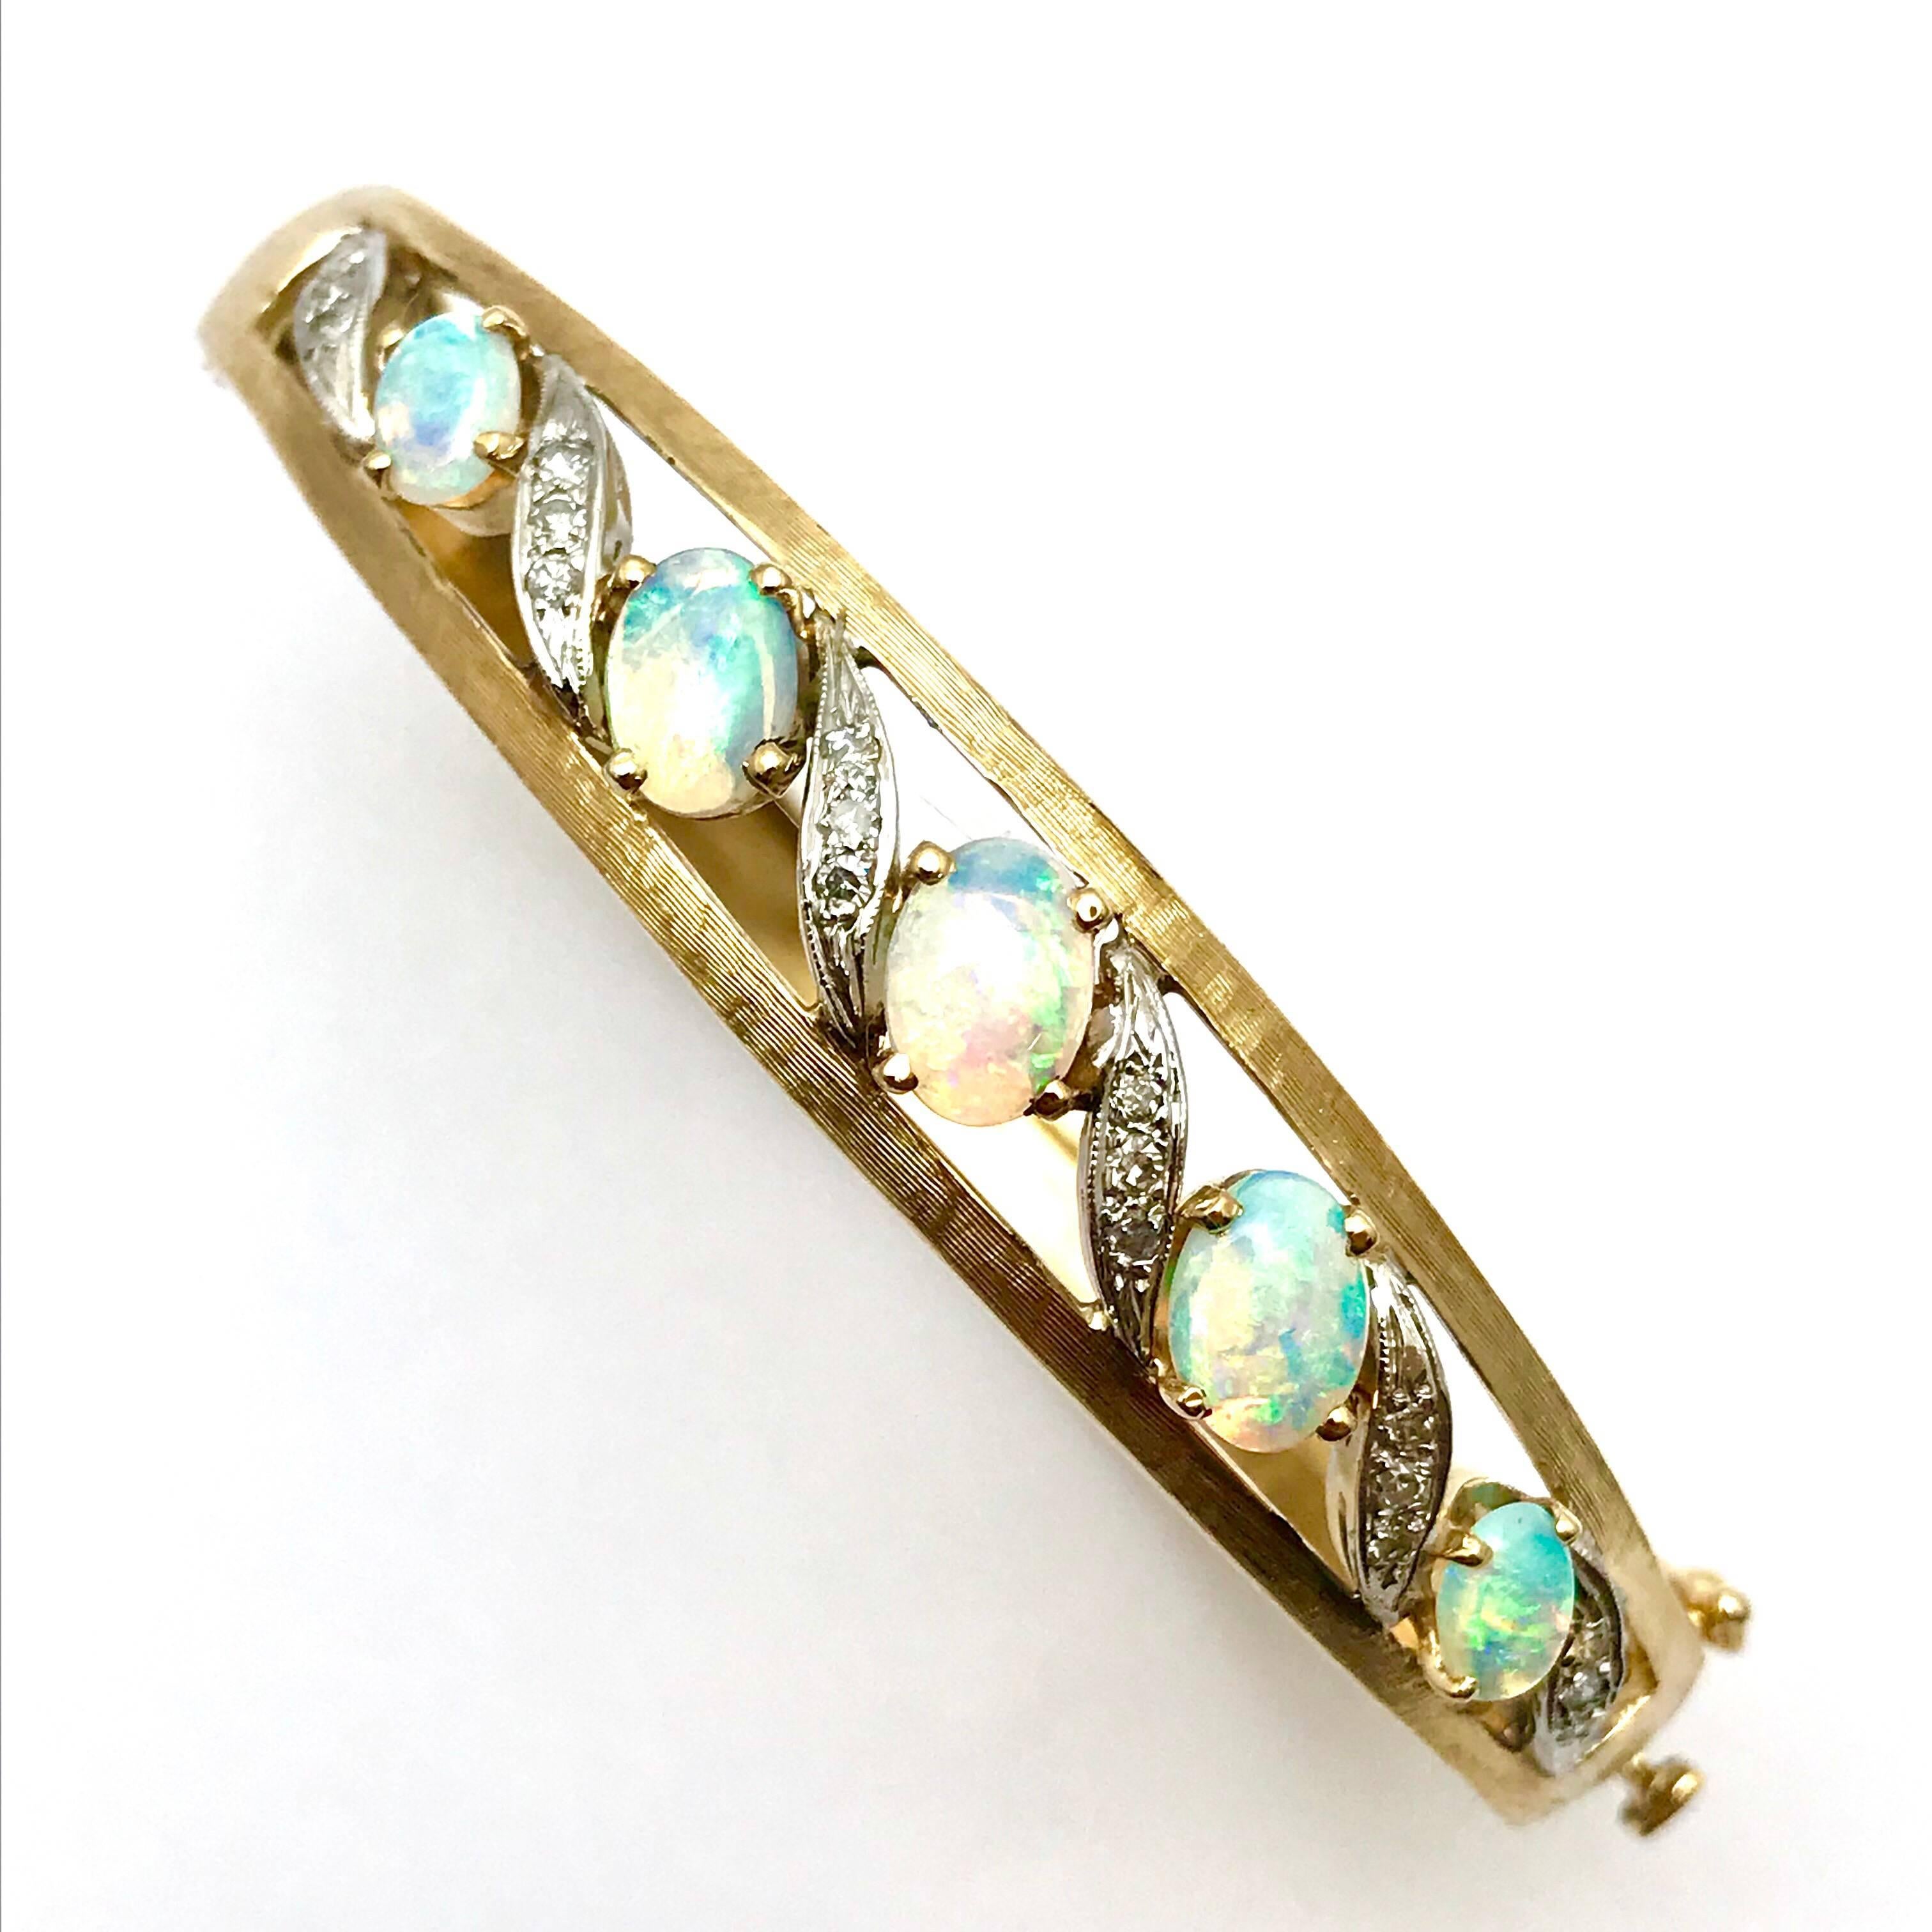 A beautiful oval Jelly Opal and Single Cut Diamond 14 karat white and yellow gold bangle bracelet.  The top of the bracelet is designed with the Diamonds set in white gold in groups of three, alternating with the Opals.  The bangle has a satin